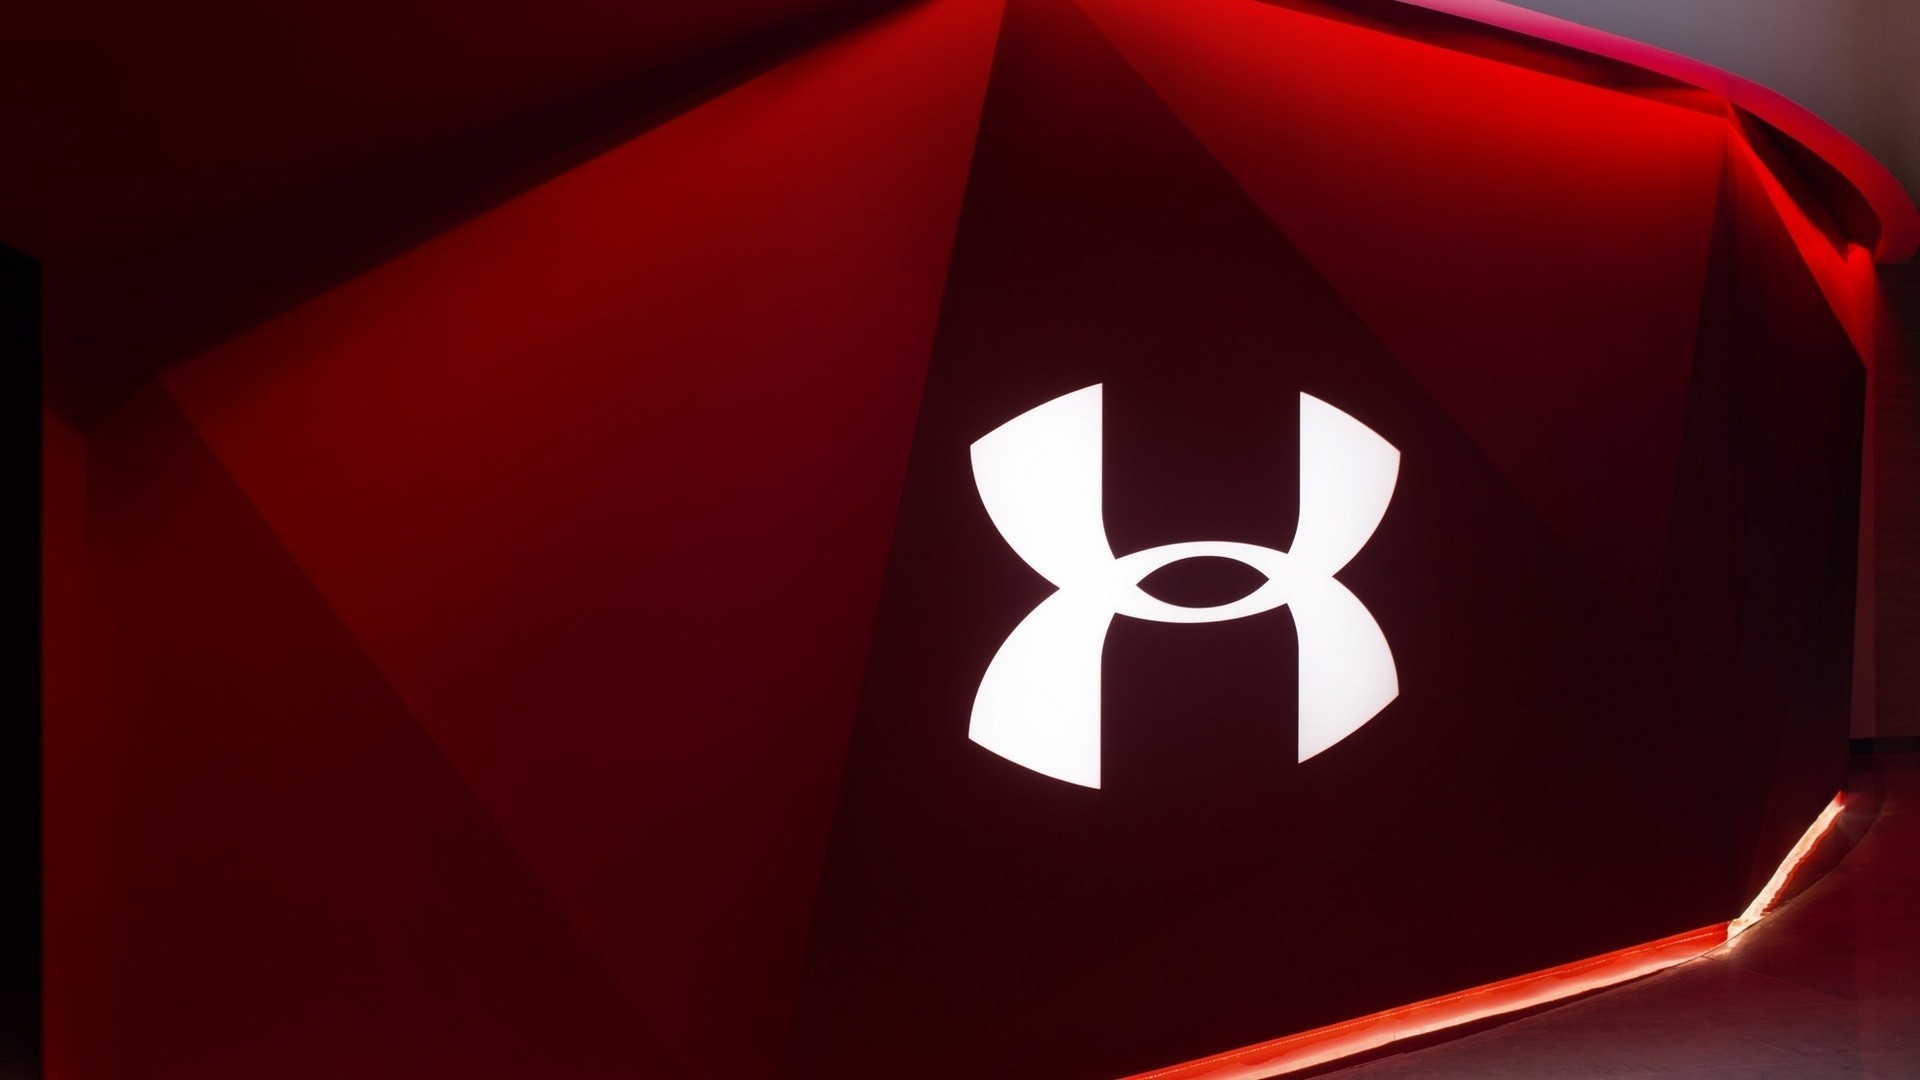 Camo Under Armour Wallpapers